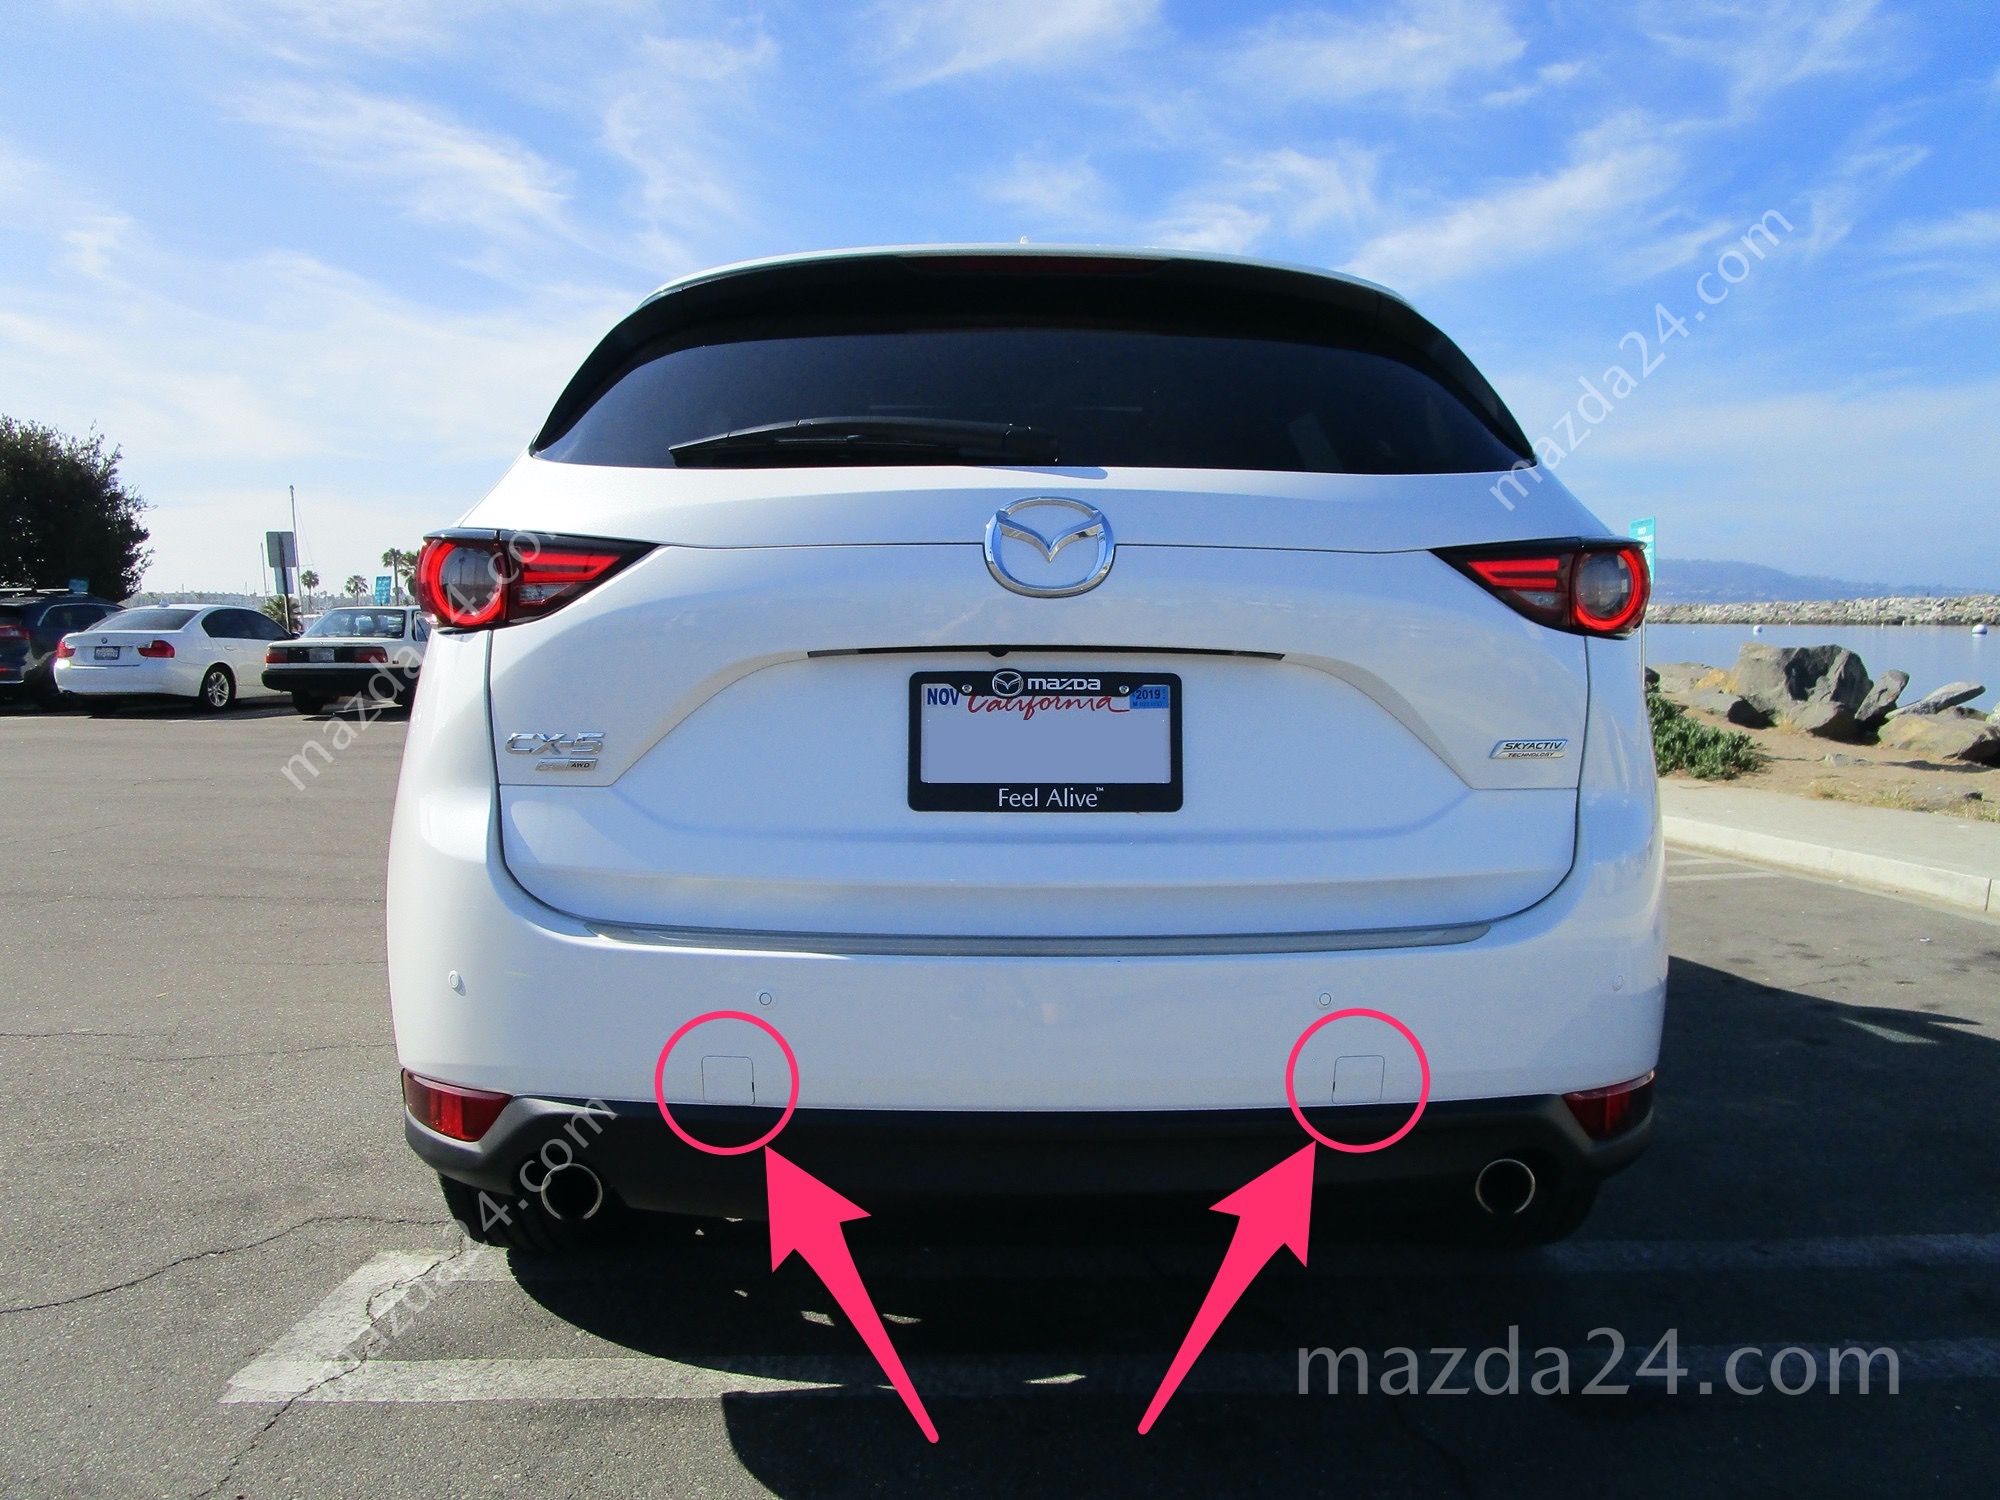 How much can the 2021 Mazda CX-5 tow?